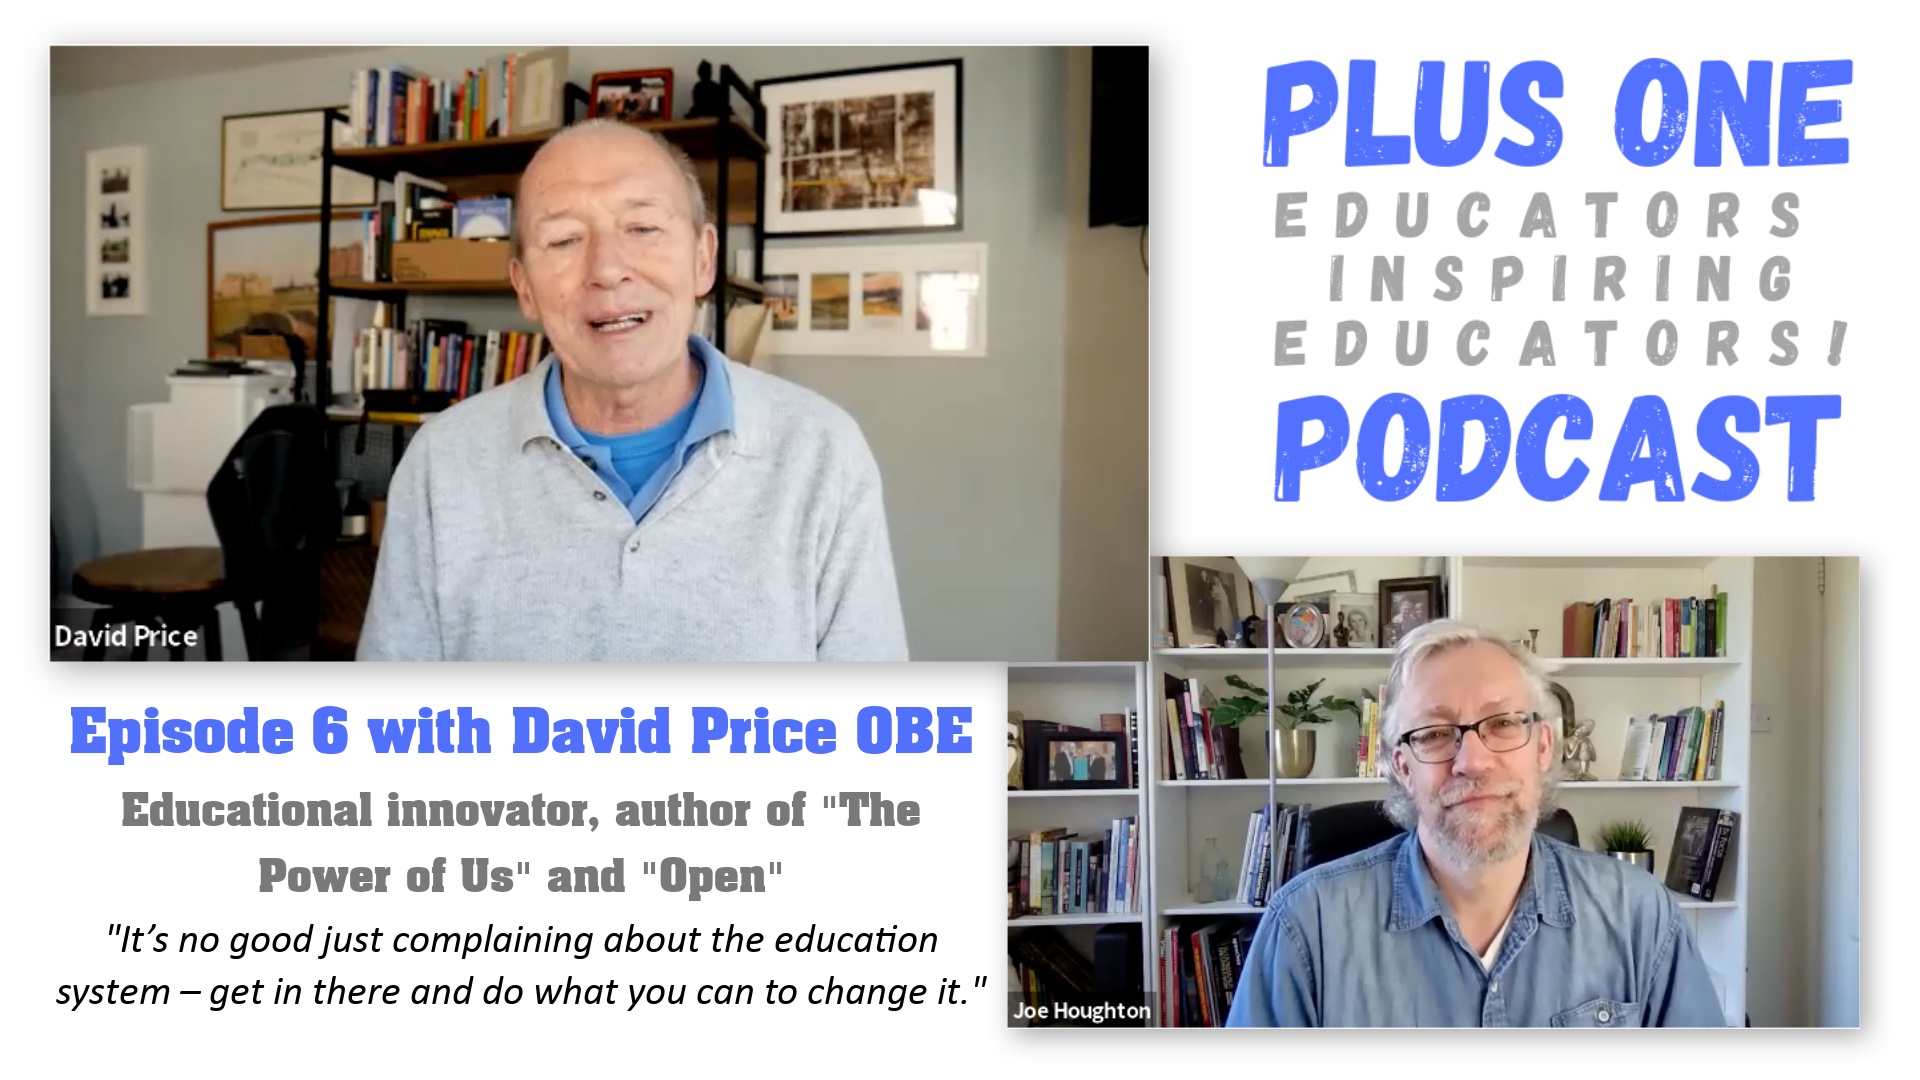 Plus One Podcast - Episode 6 - David Price OBE on educational innovation